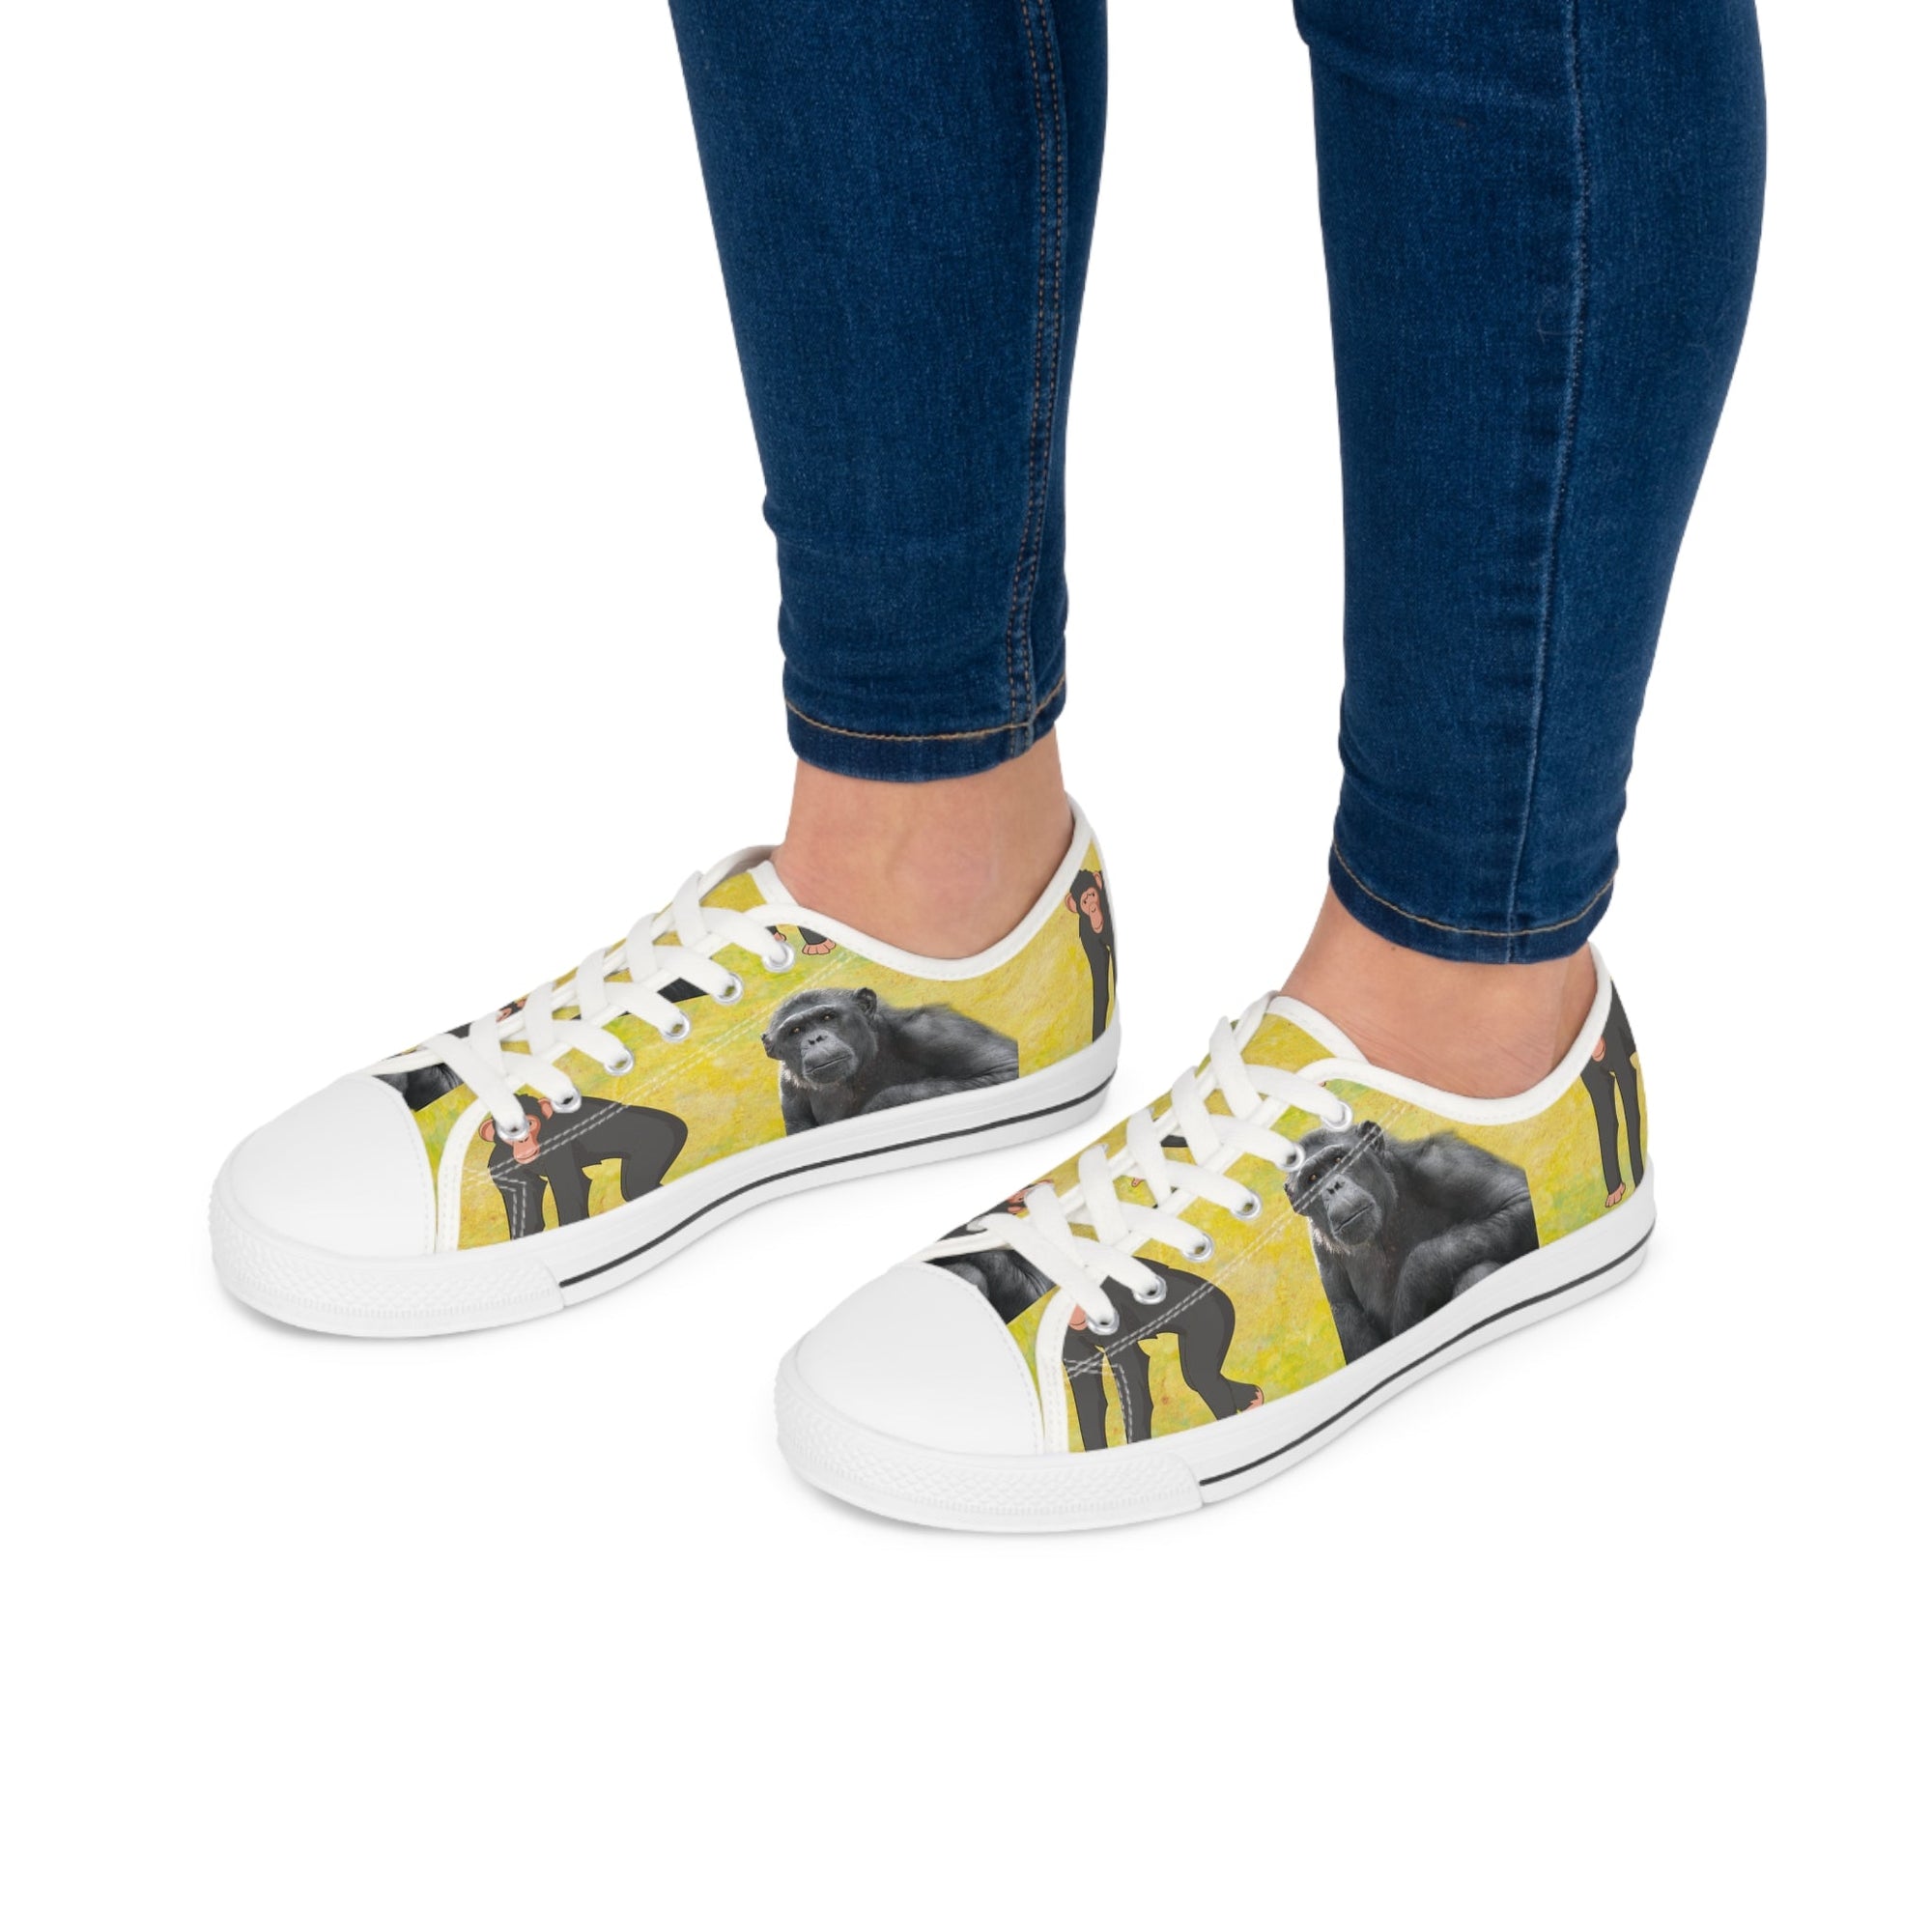 Women's Low Top Iconic Chimpanzee Sneakers - Primation